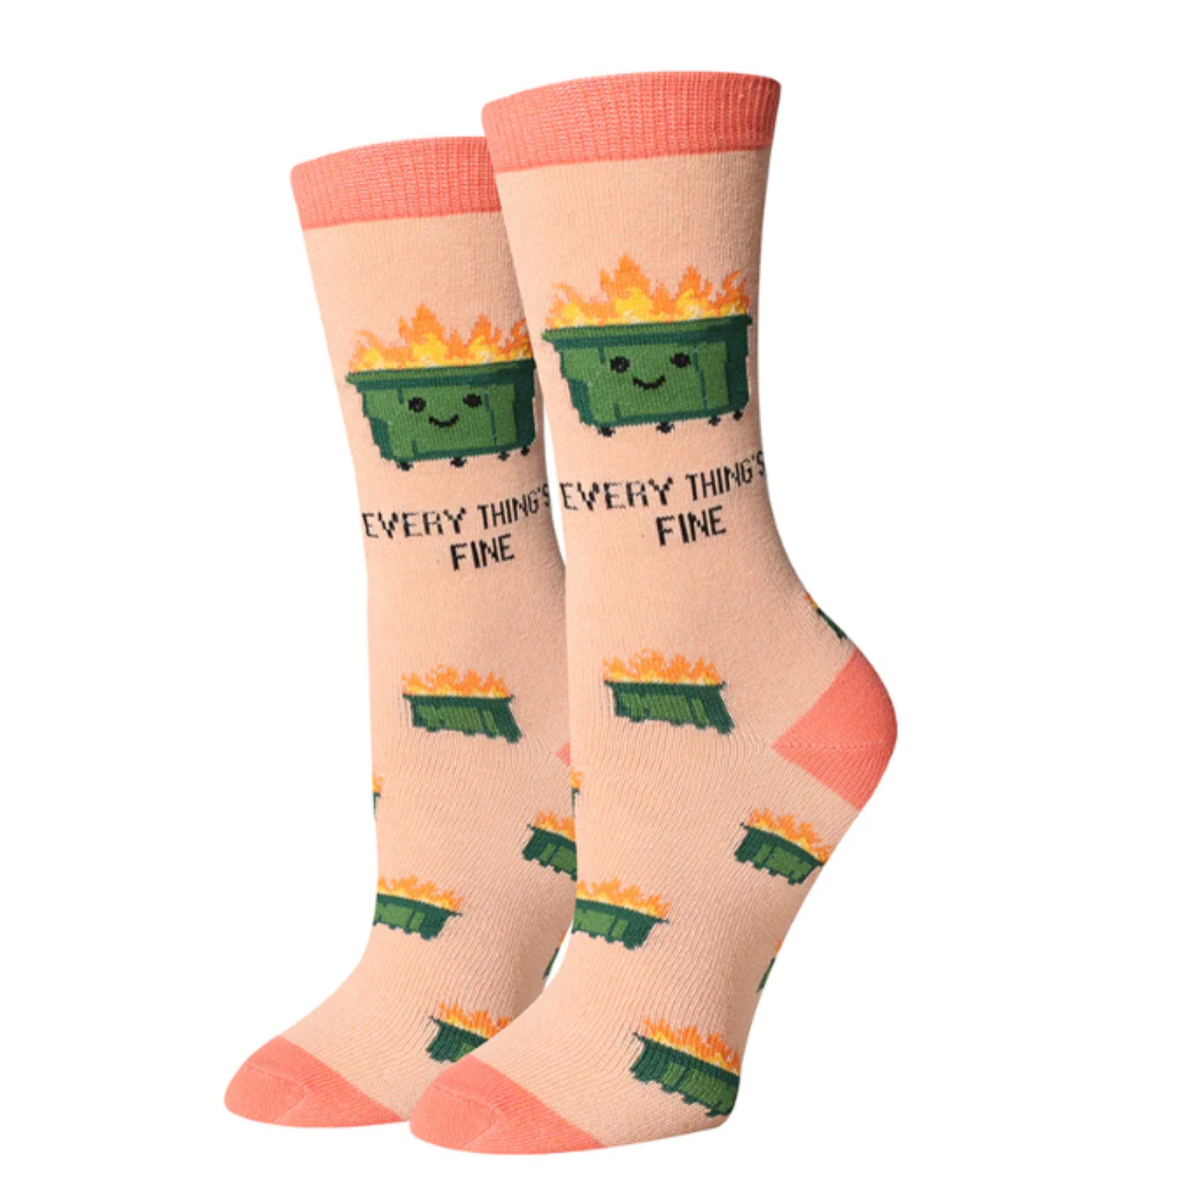 Sock Harbor Everything&#39;s Fine women&#39;s crew sock featuring pink sock with pink cuff, heel and toe. Sock has &quot;Everything&#39;s Fine&quot; written on it with image of smiling trash dumpster on fire. Socks shown on display. 